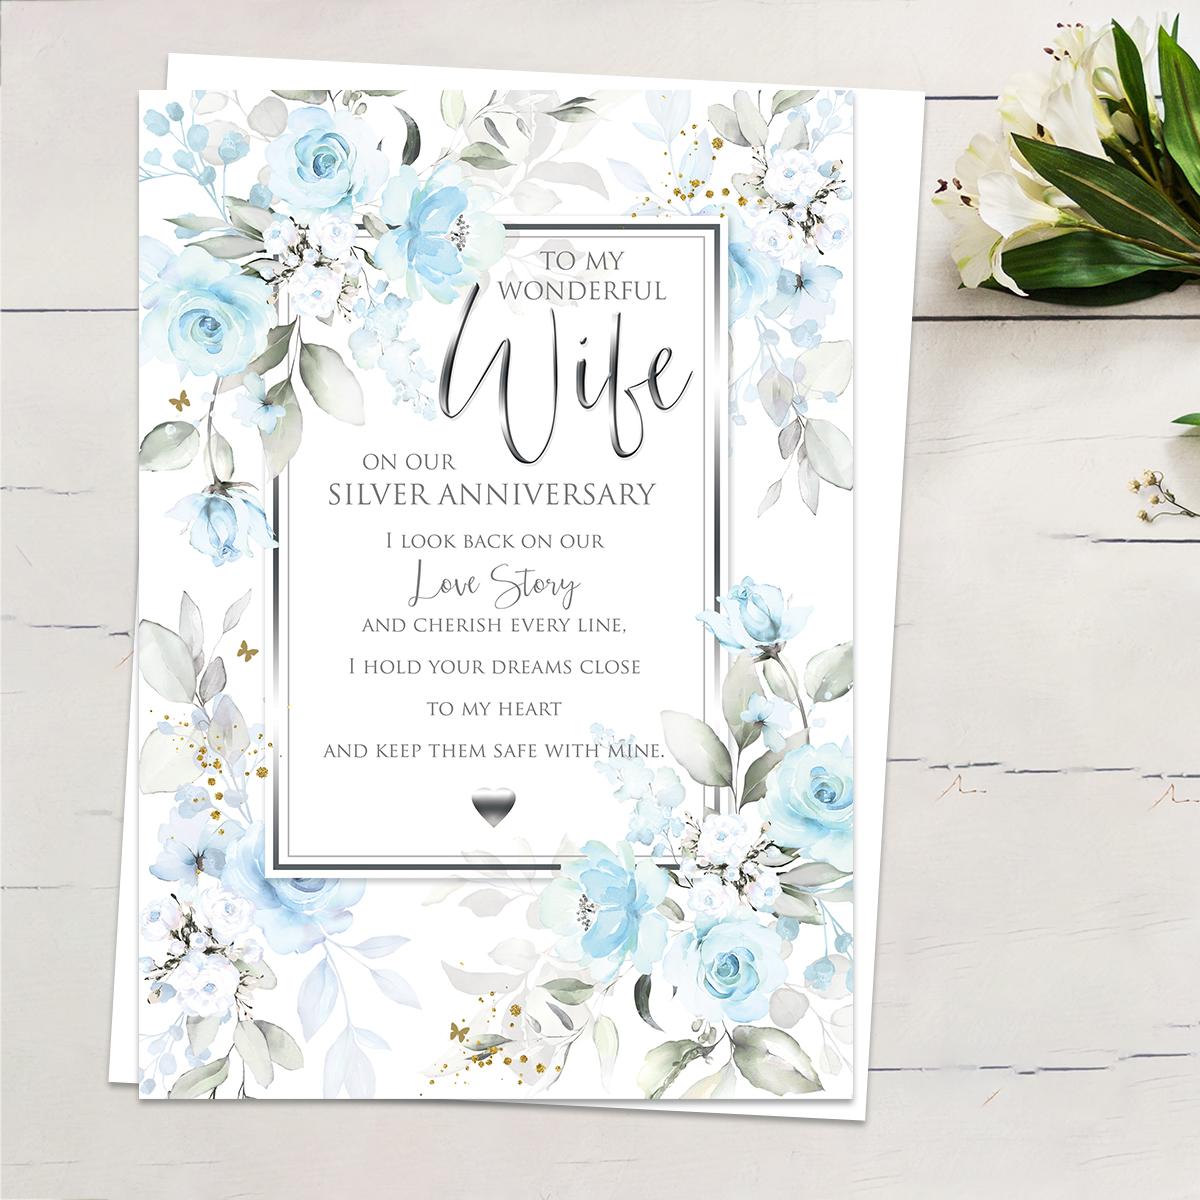 ' To My Wonderful Wife On Our Silver Anniversary' Featuring Pale Blue Roses And Leaves With Gold Foil Detail, Heartfelt Words And White Envelope